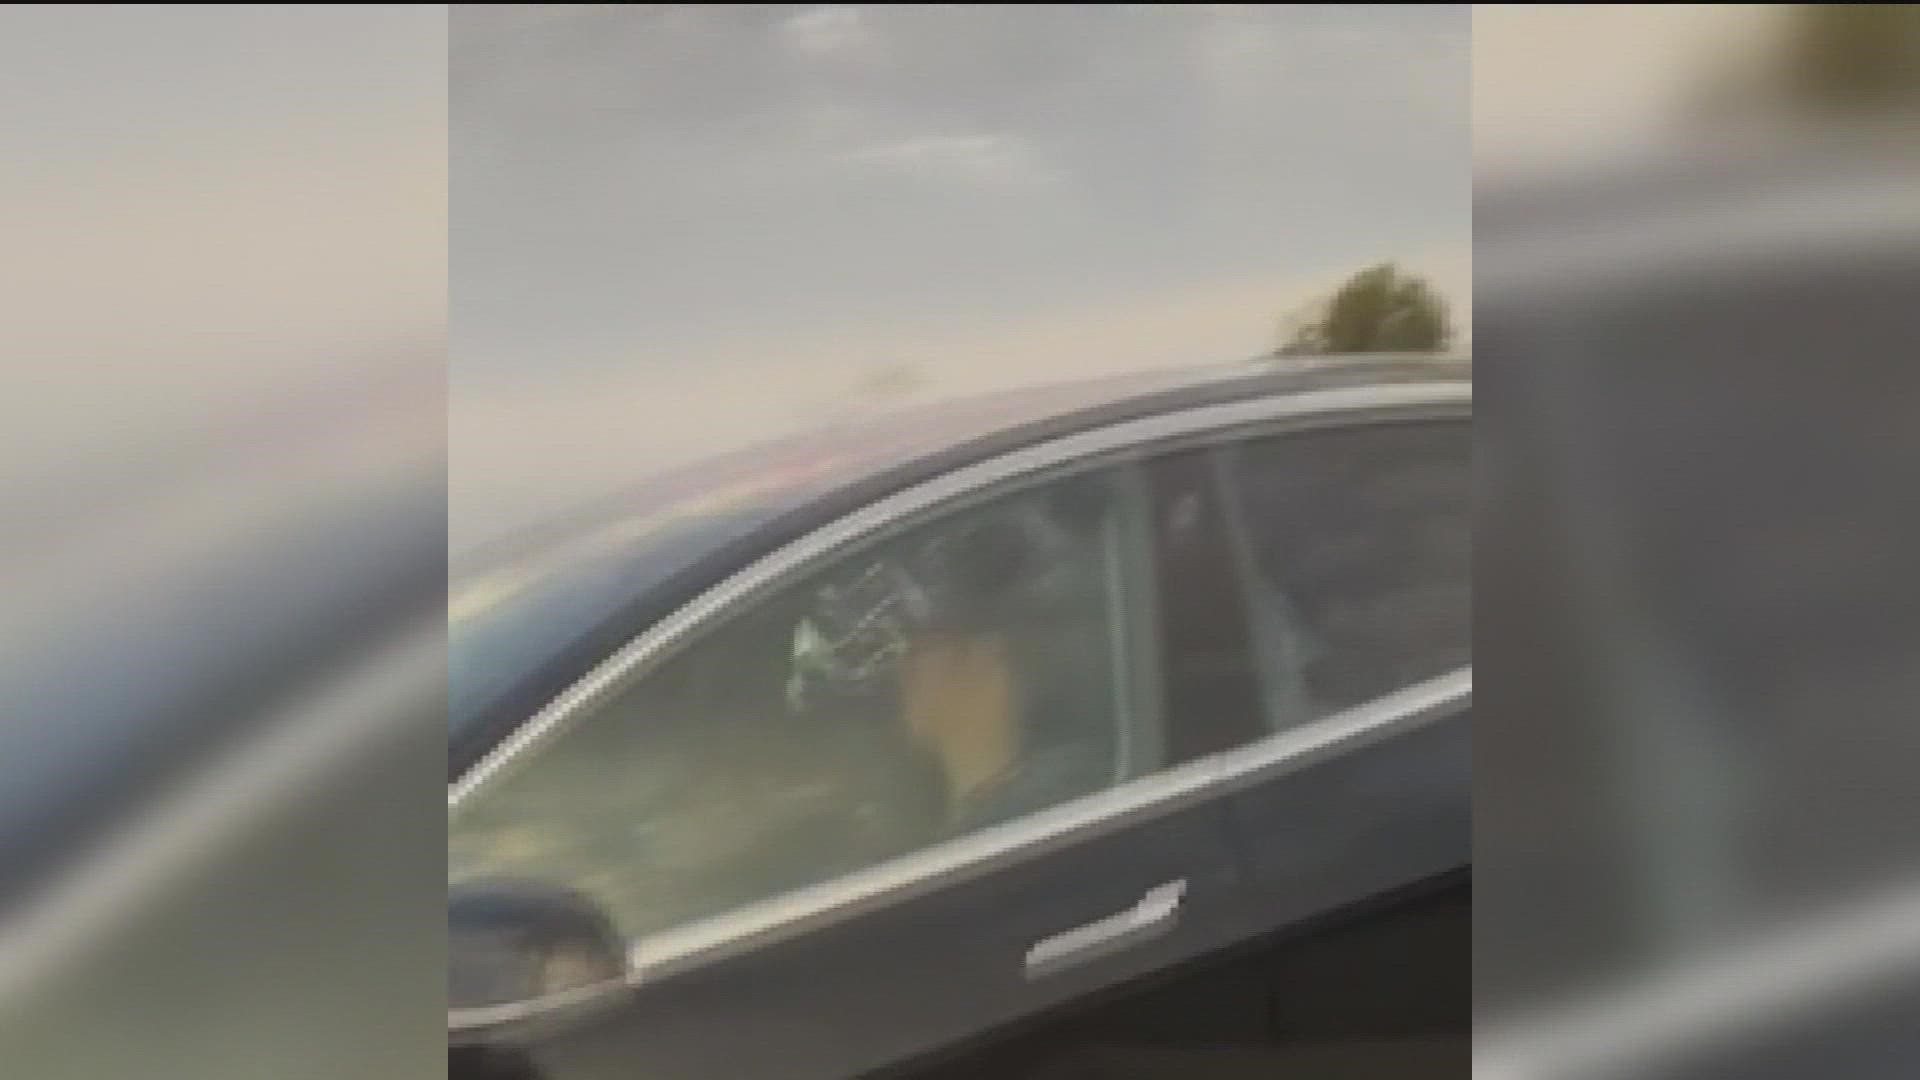 Video shows driver of a Tesla asleep at the wheel